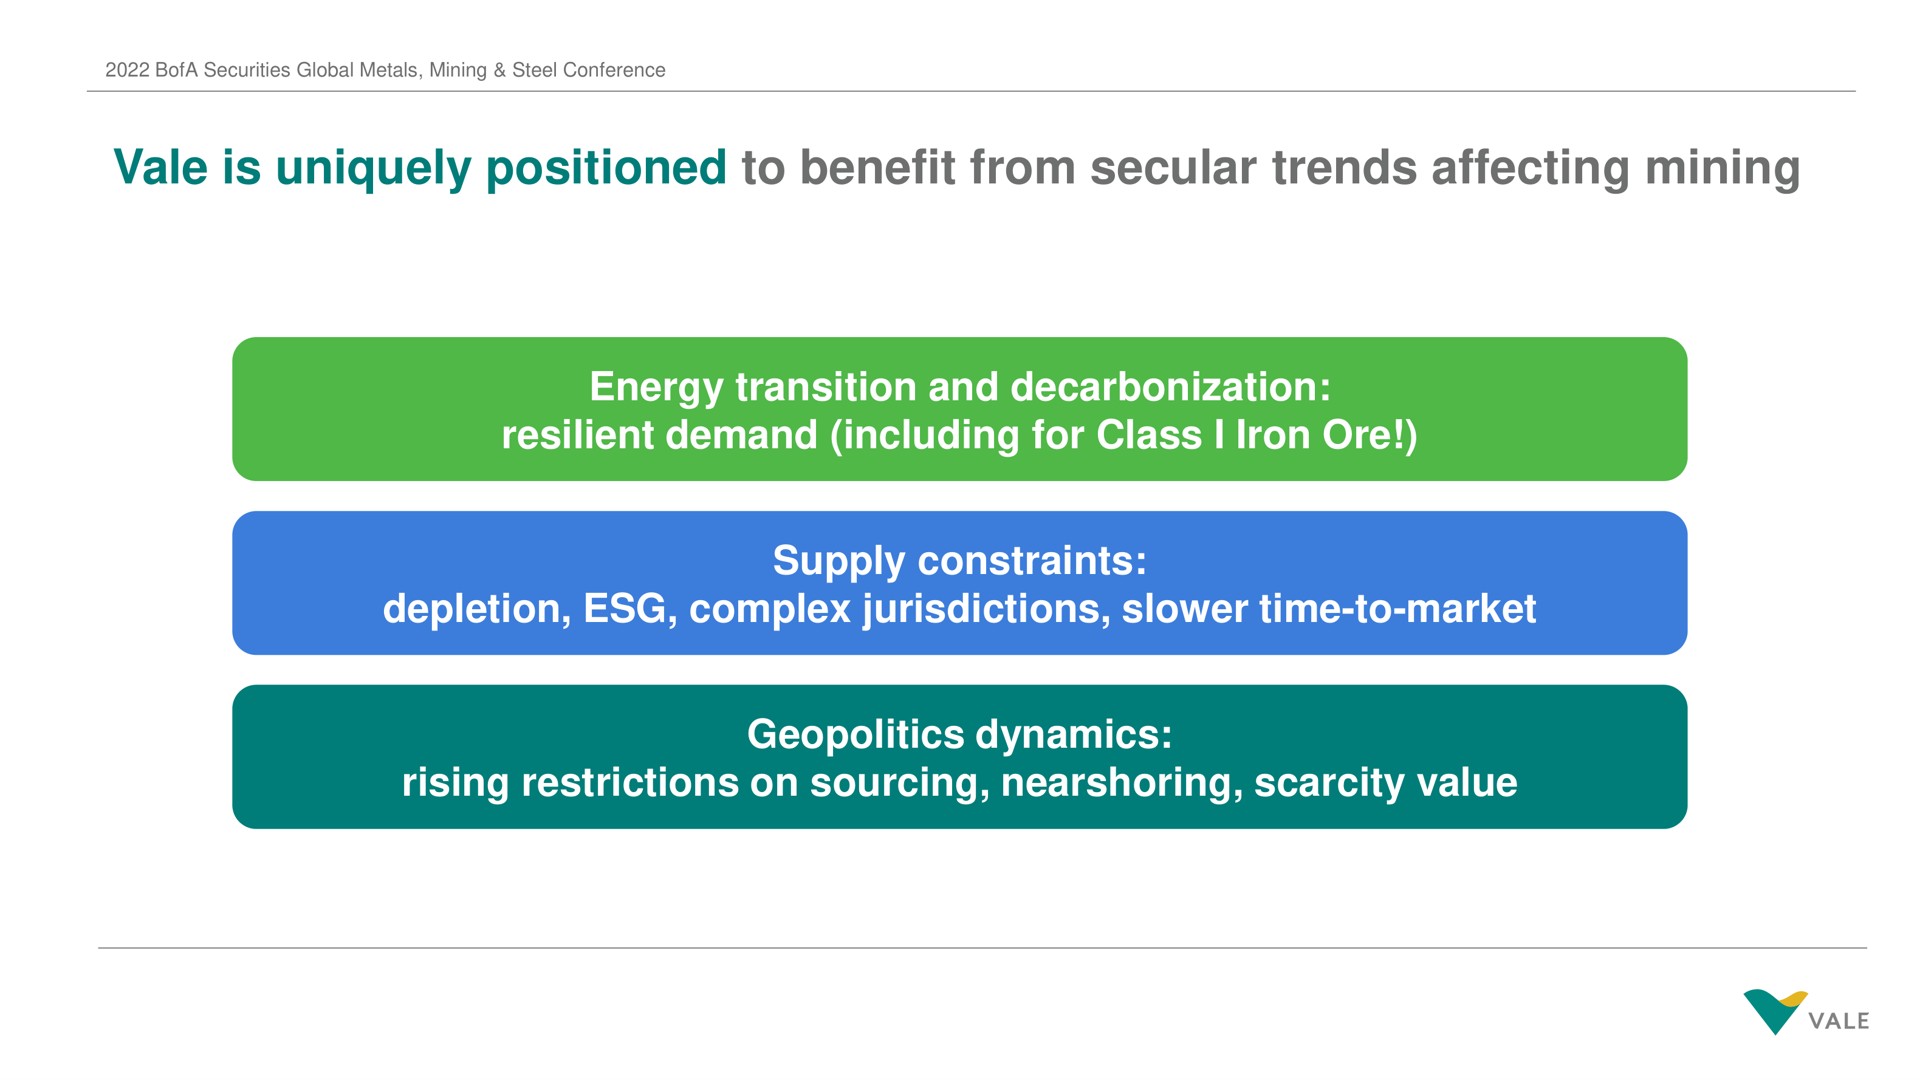 vale is uniquely positioned to benefit from secular trends affecting mining energy transition and decarbonization resilient demand including for class i iron ore supply constraints depletion complex jurisdictions time to market geopolitics dynamics rising restrictions on sourcing scarcity value | Vale